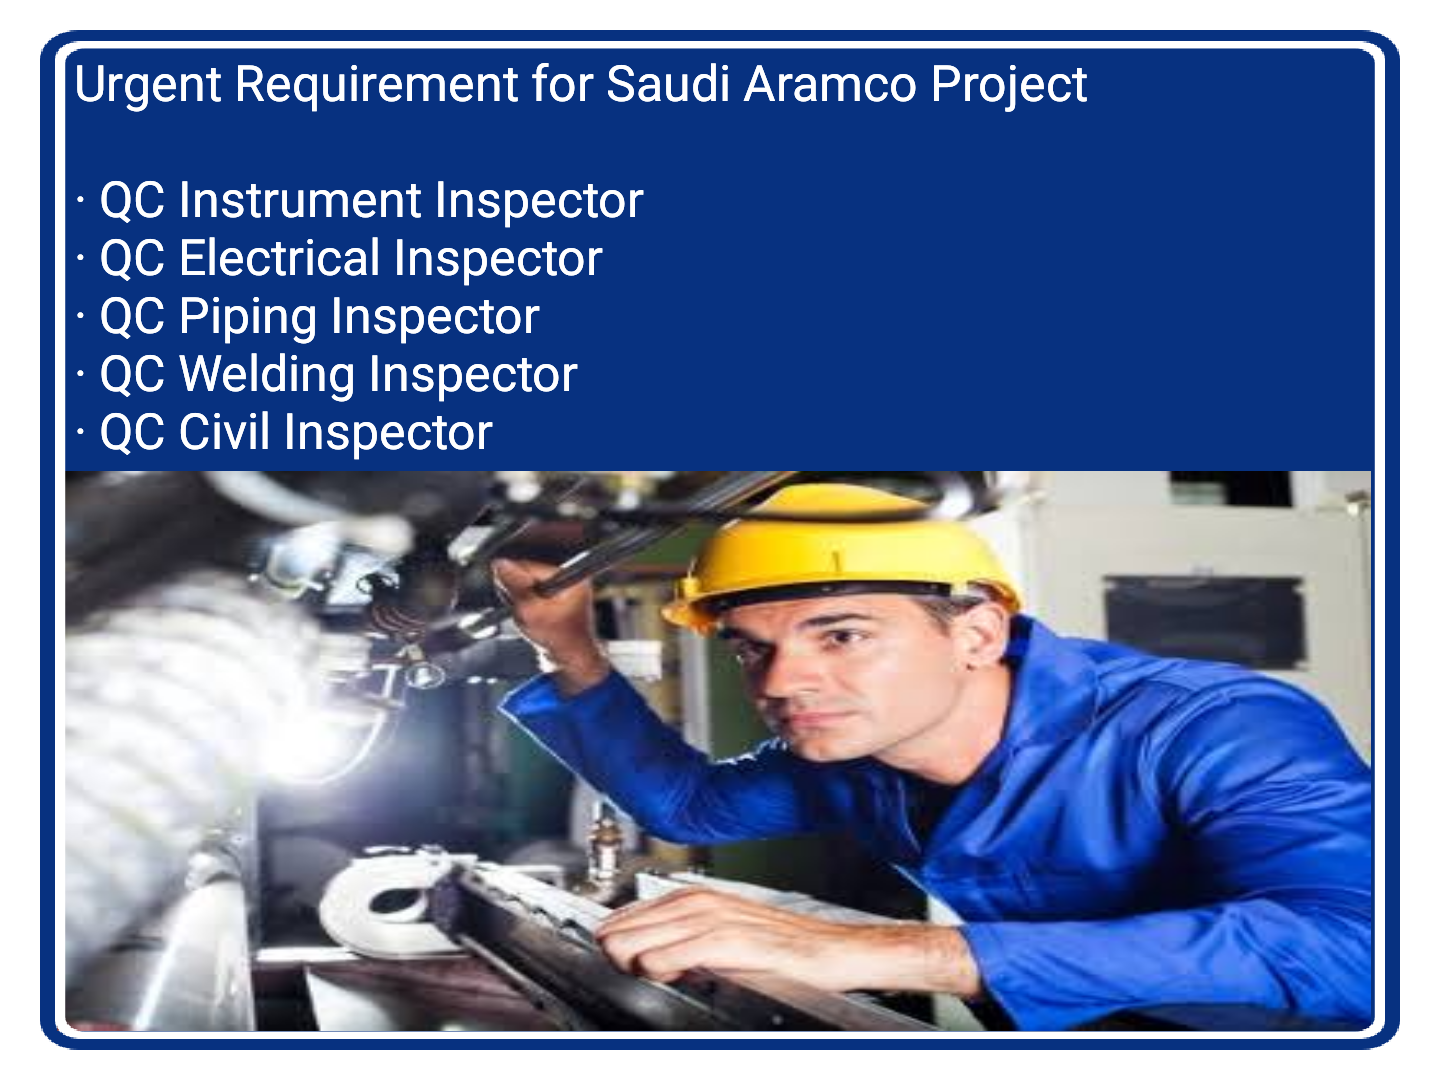 Instrument, Electrical, Piping, Welding & Civil QC Inspector Jobs